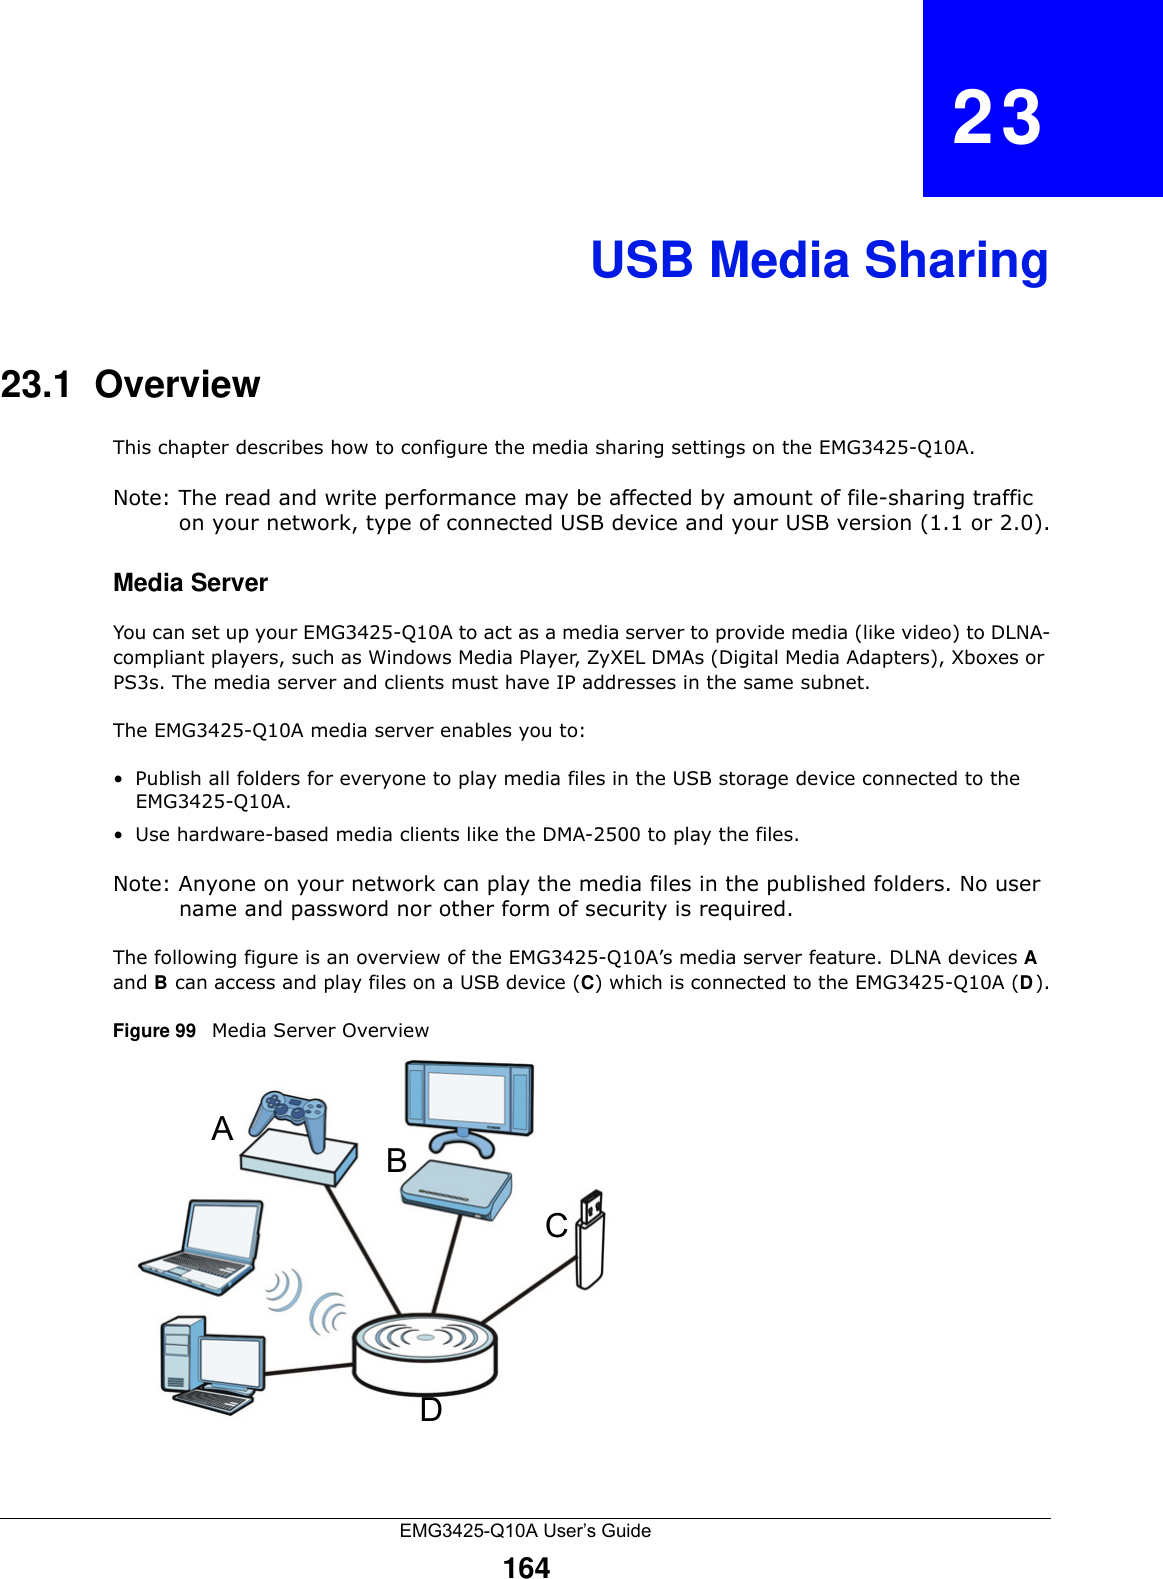 EMG3425-Q10A User’s Guide164CHAPTER   23USB Media Sharing23.1  OverviewThis chapter describes how to configure the media sharing settings on the EMG3425-Q10A.Note: The read and write performance may be affected by amount of file-sharing traffic on your network, type of connected USB device and your USB version (1.1 or 2.0).Media ServerYou can set up your EMG3425-Q10A to act as a media server to provide media (like video) to DLNA-compliant players, such as Windows Media Player, ZyXEL DMAs (Digital Media Adapters), Xboxes or PS3s. The media server and clients must have IP addresses in the same subnet.The EMG3425-Q10A media server enables you to:• Publish all folders for everyone to play media files in the USB storage device connected to the EMG3425-Q10A.• Use hardware-based media clients like the DMA-2500 to play the files.Note: Anyone on your network can play the media files in the published folders. No user name and password nor other form of security is required. The following figure is an overview of the EMG3425-Q10A’s media server feature. DLNA devices A and B can access and play files on a USB device (C) which is connected to the EMG3425-Q10A (D).Figure 99   Media Server OverviewABCD